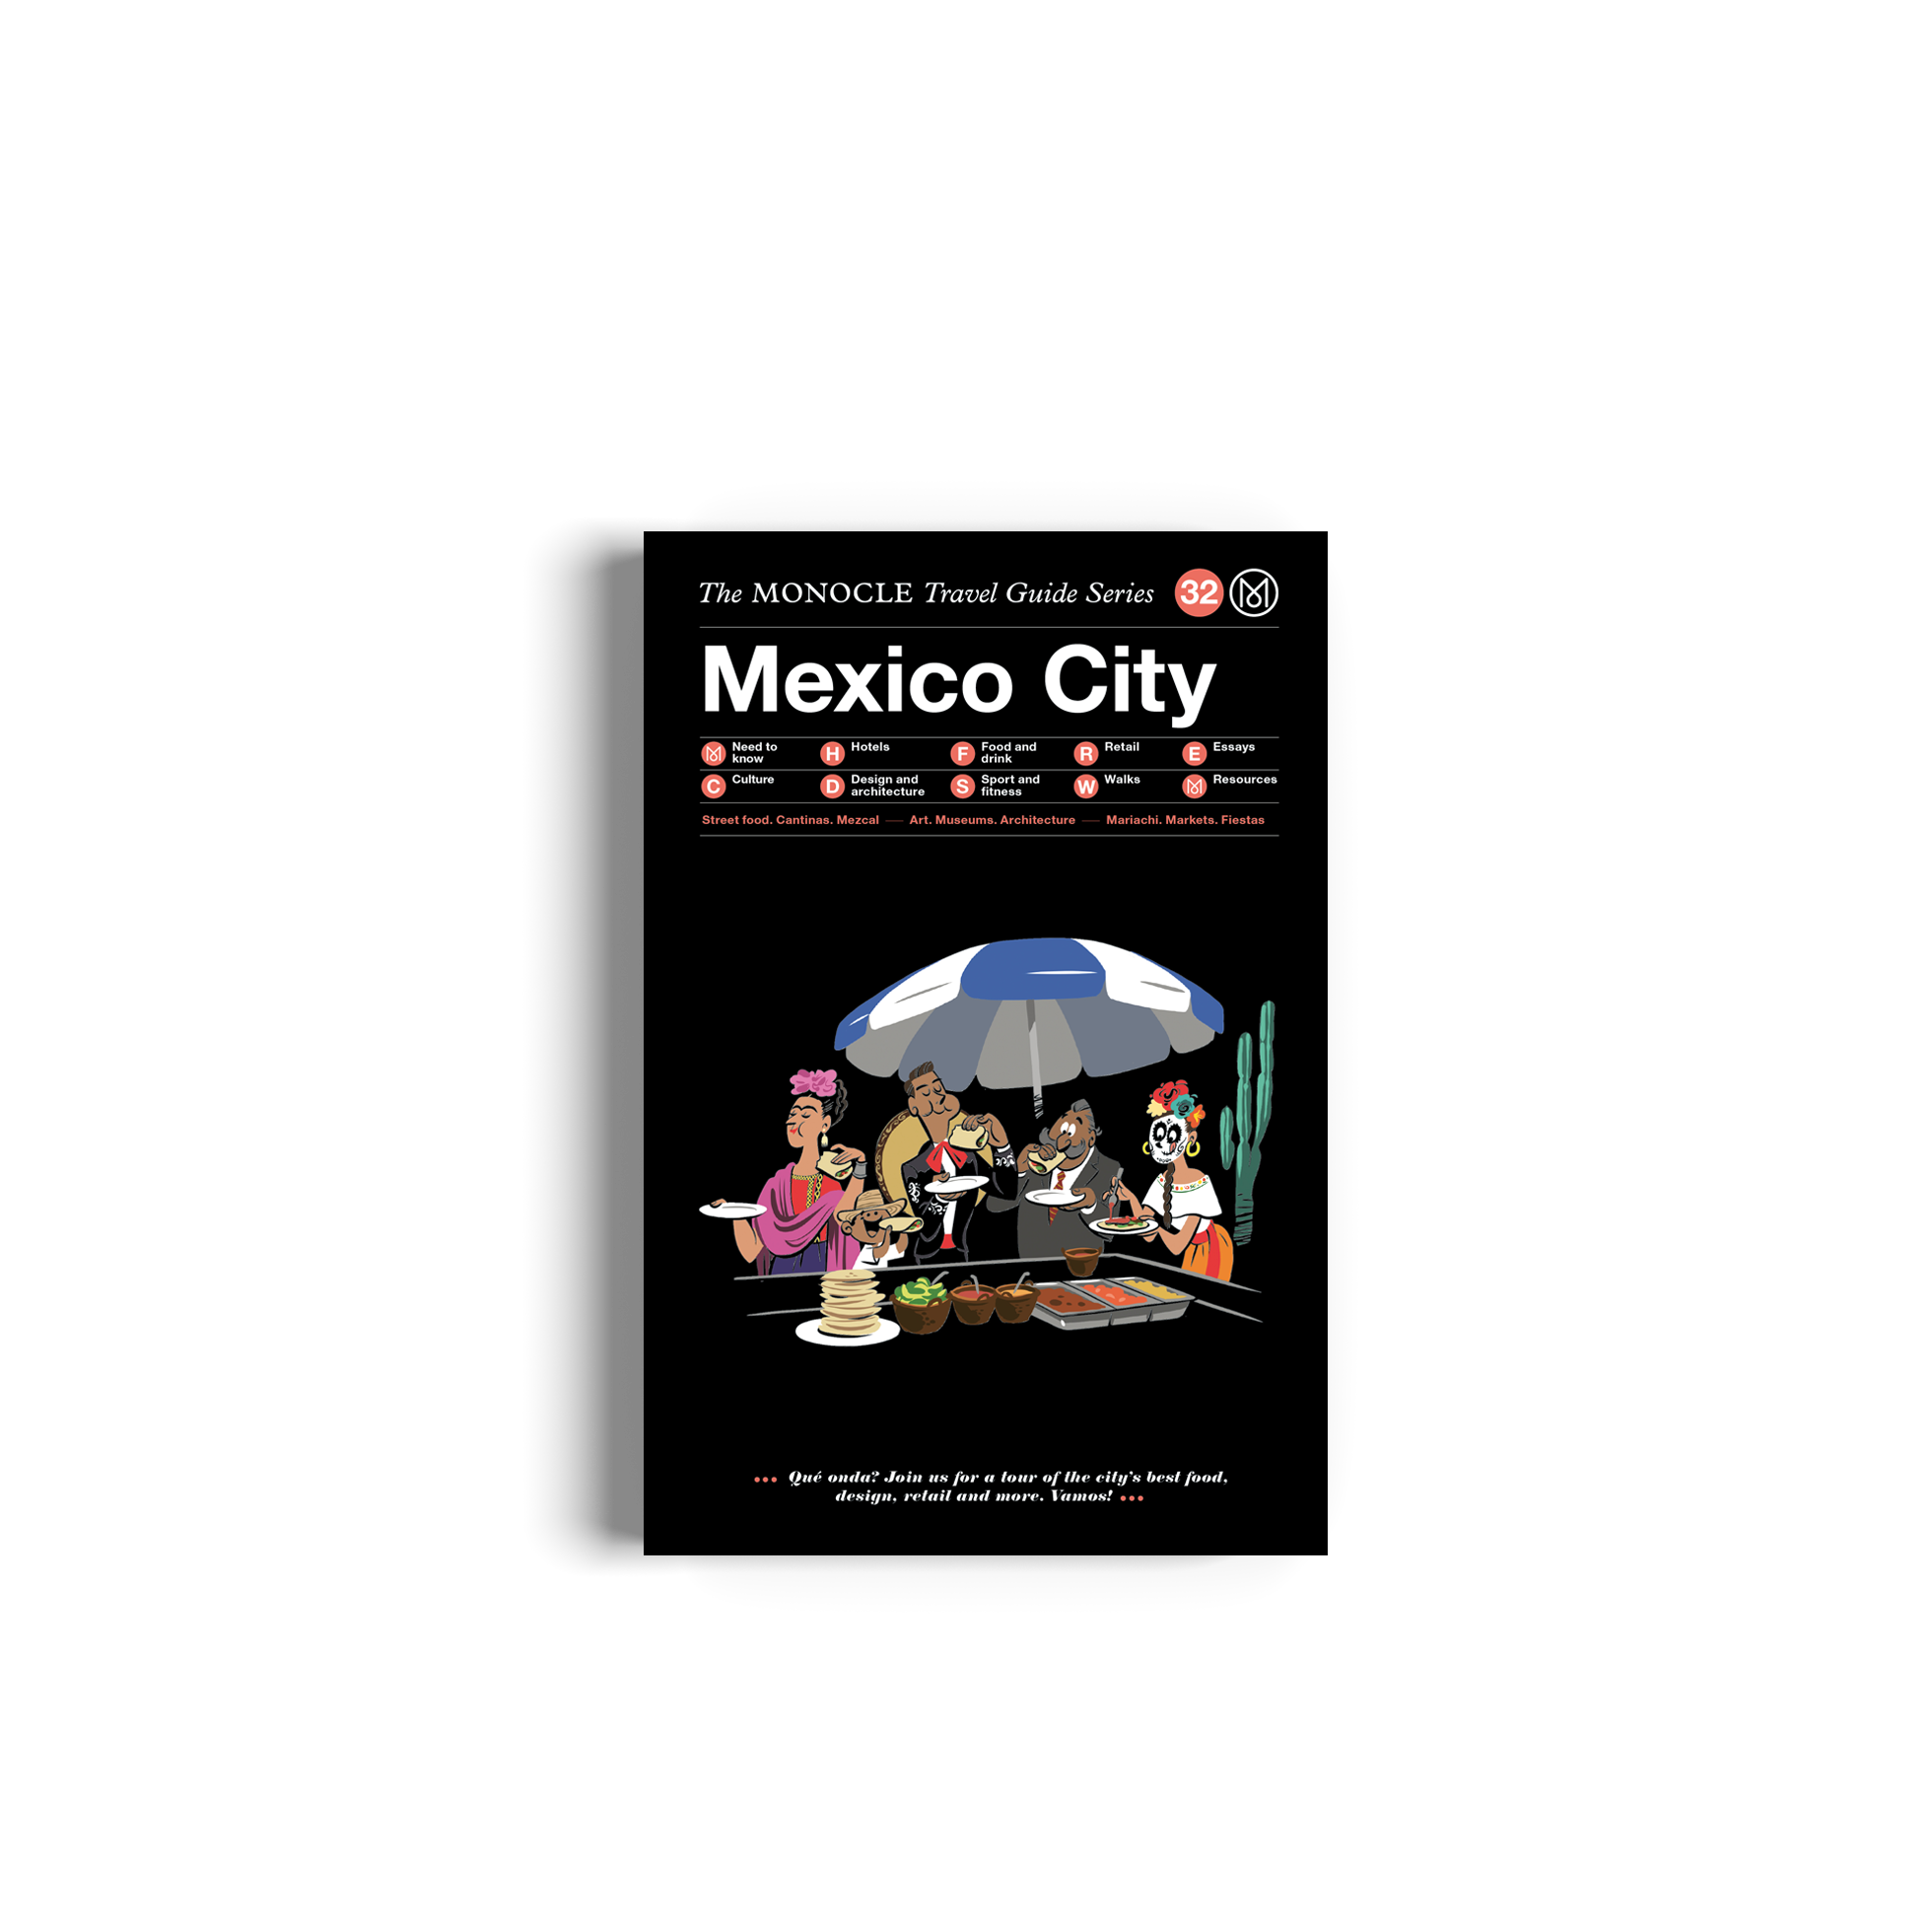 Mexico City: The Monocle Travel Guide Series